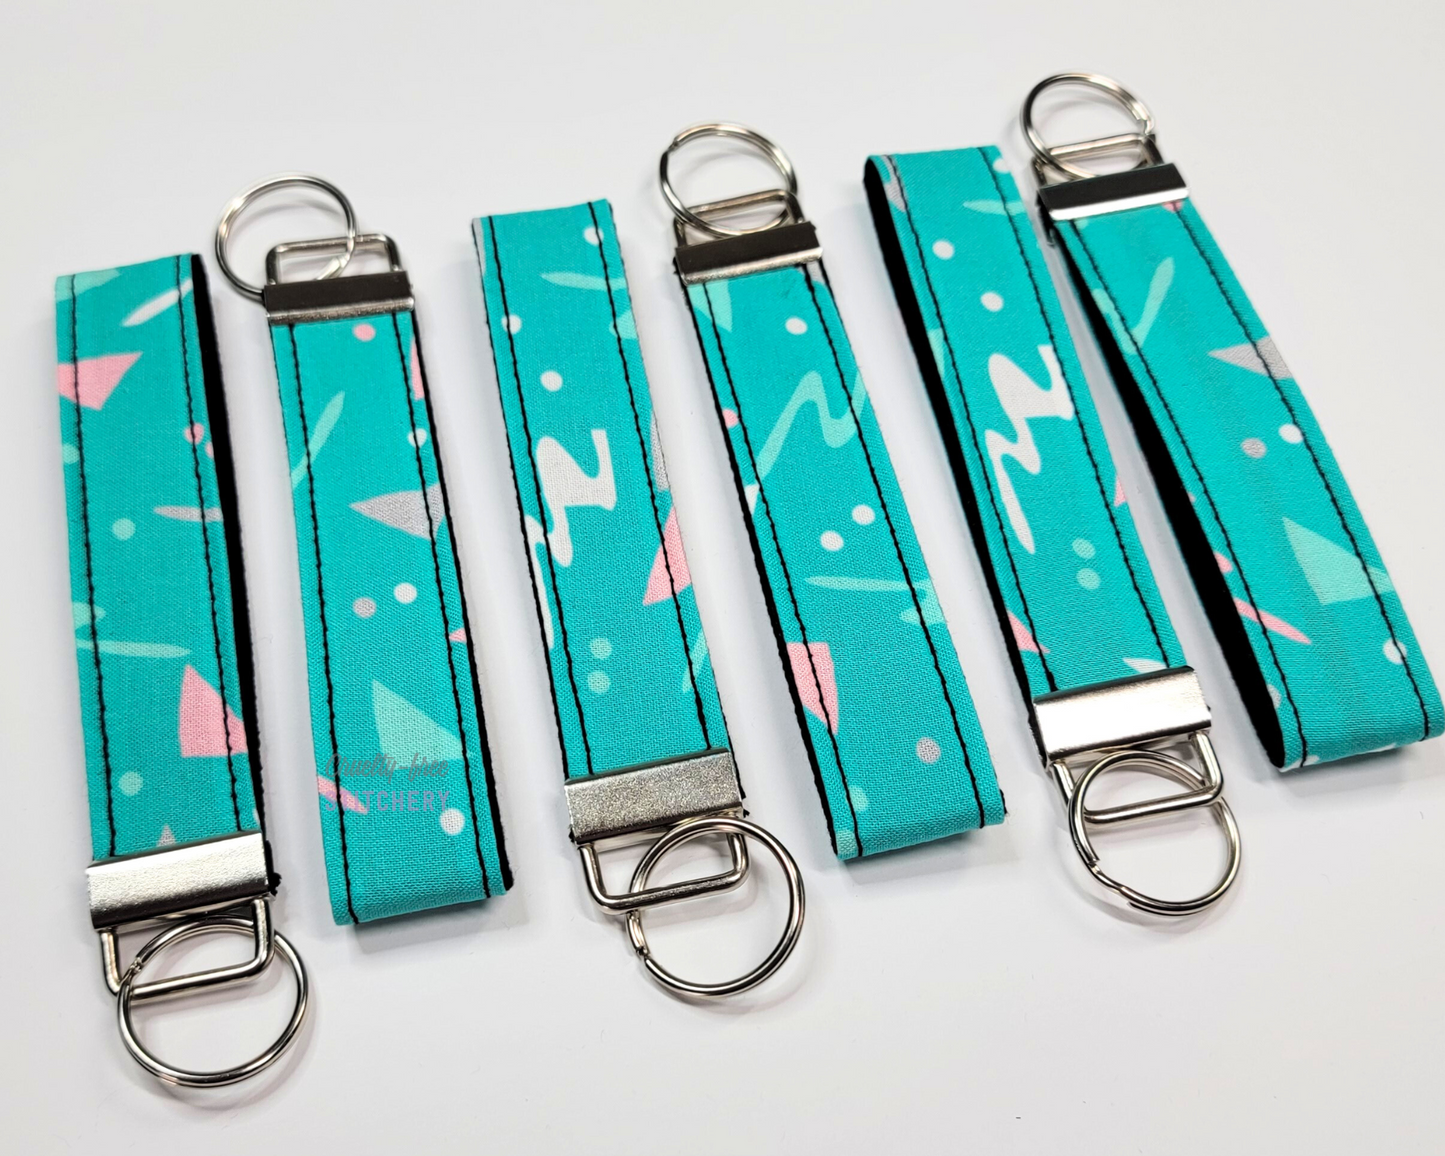 Wristlet key fobs arranged in a row of six with ends alternating. The wristlet is turquoise fabric with pink and grey 90s inspired squiggles. The hardware and keyring are silver.